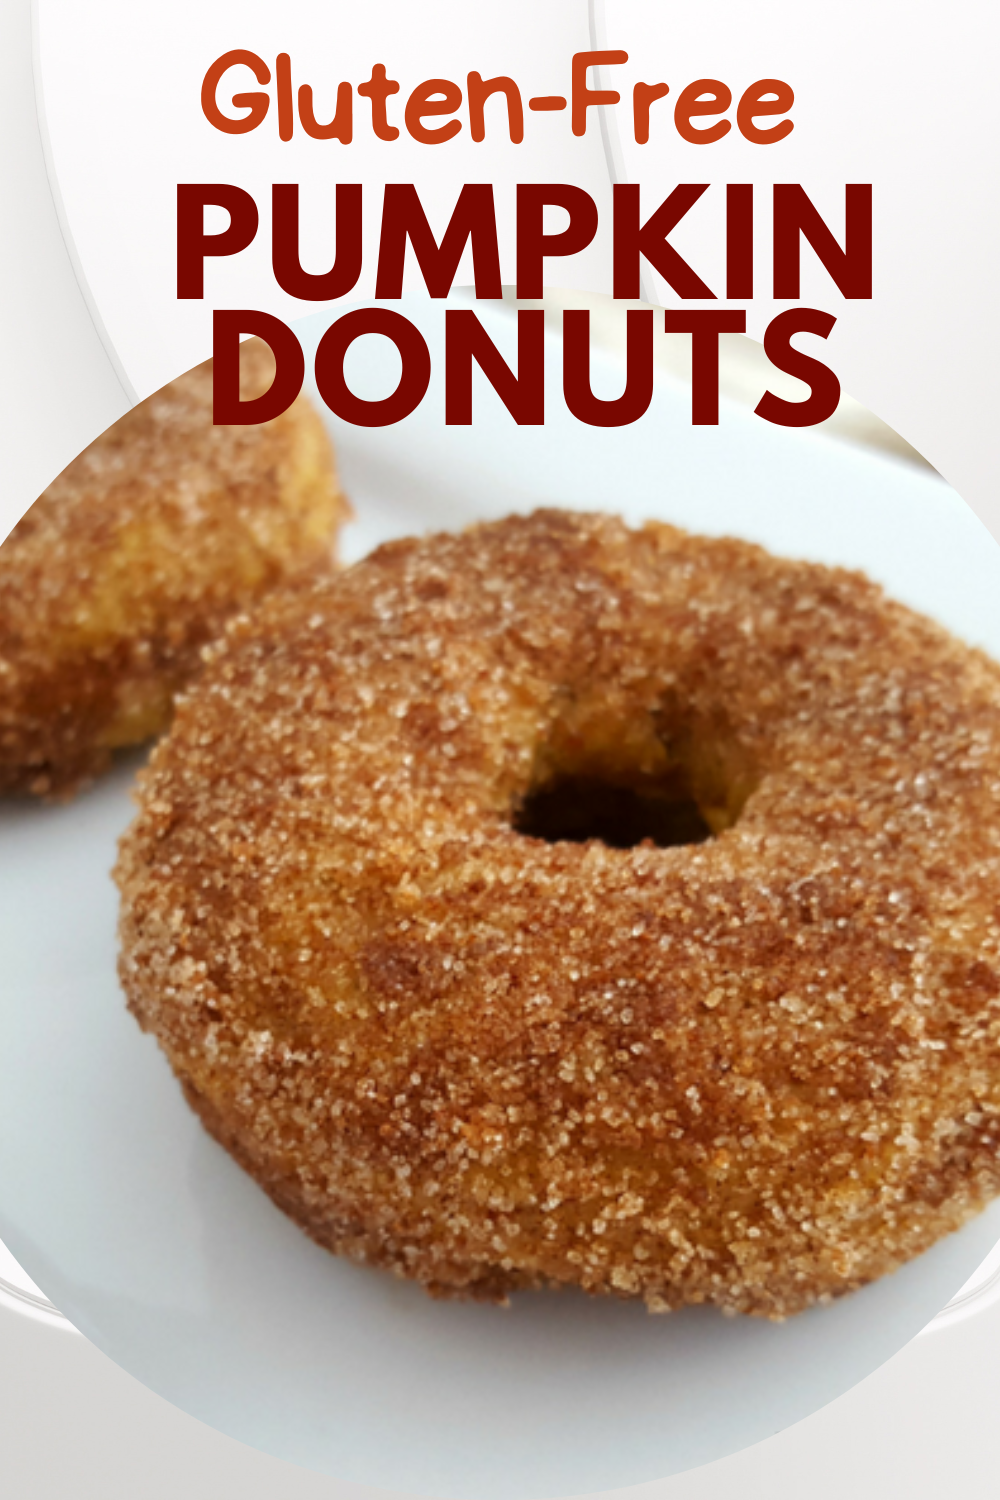 These Gluten-Free Pumpkin Donuts with Sugar and Spice are the perfect treat to enjoy this fall - and so easy to make at home!